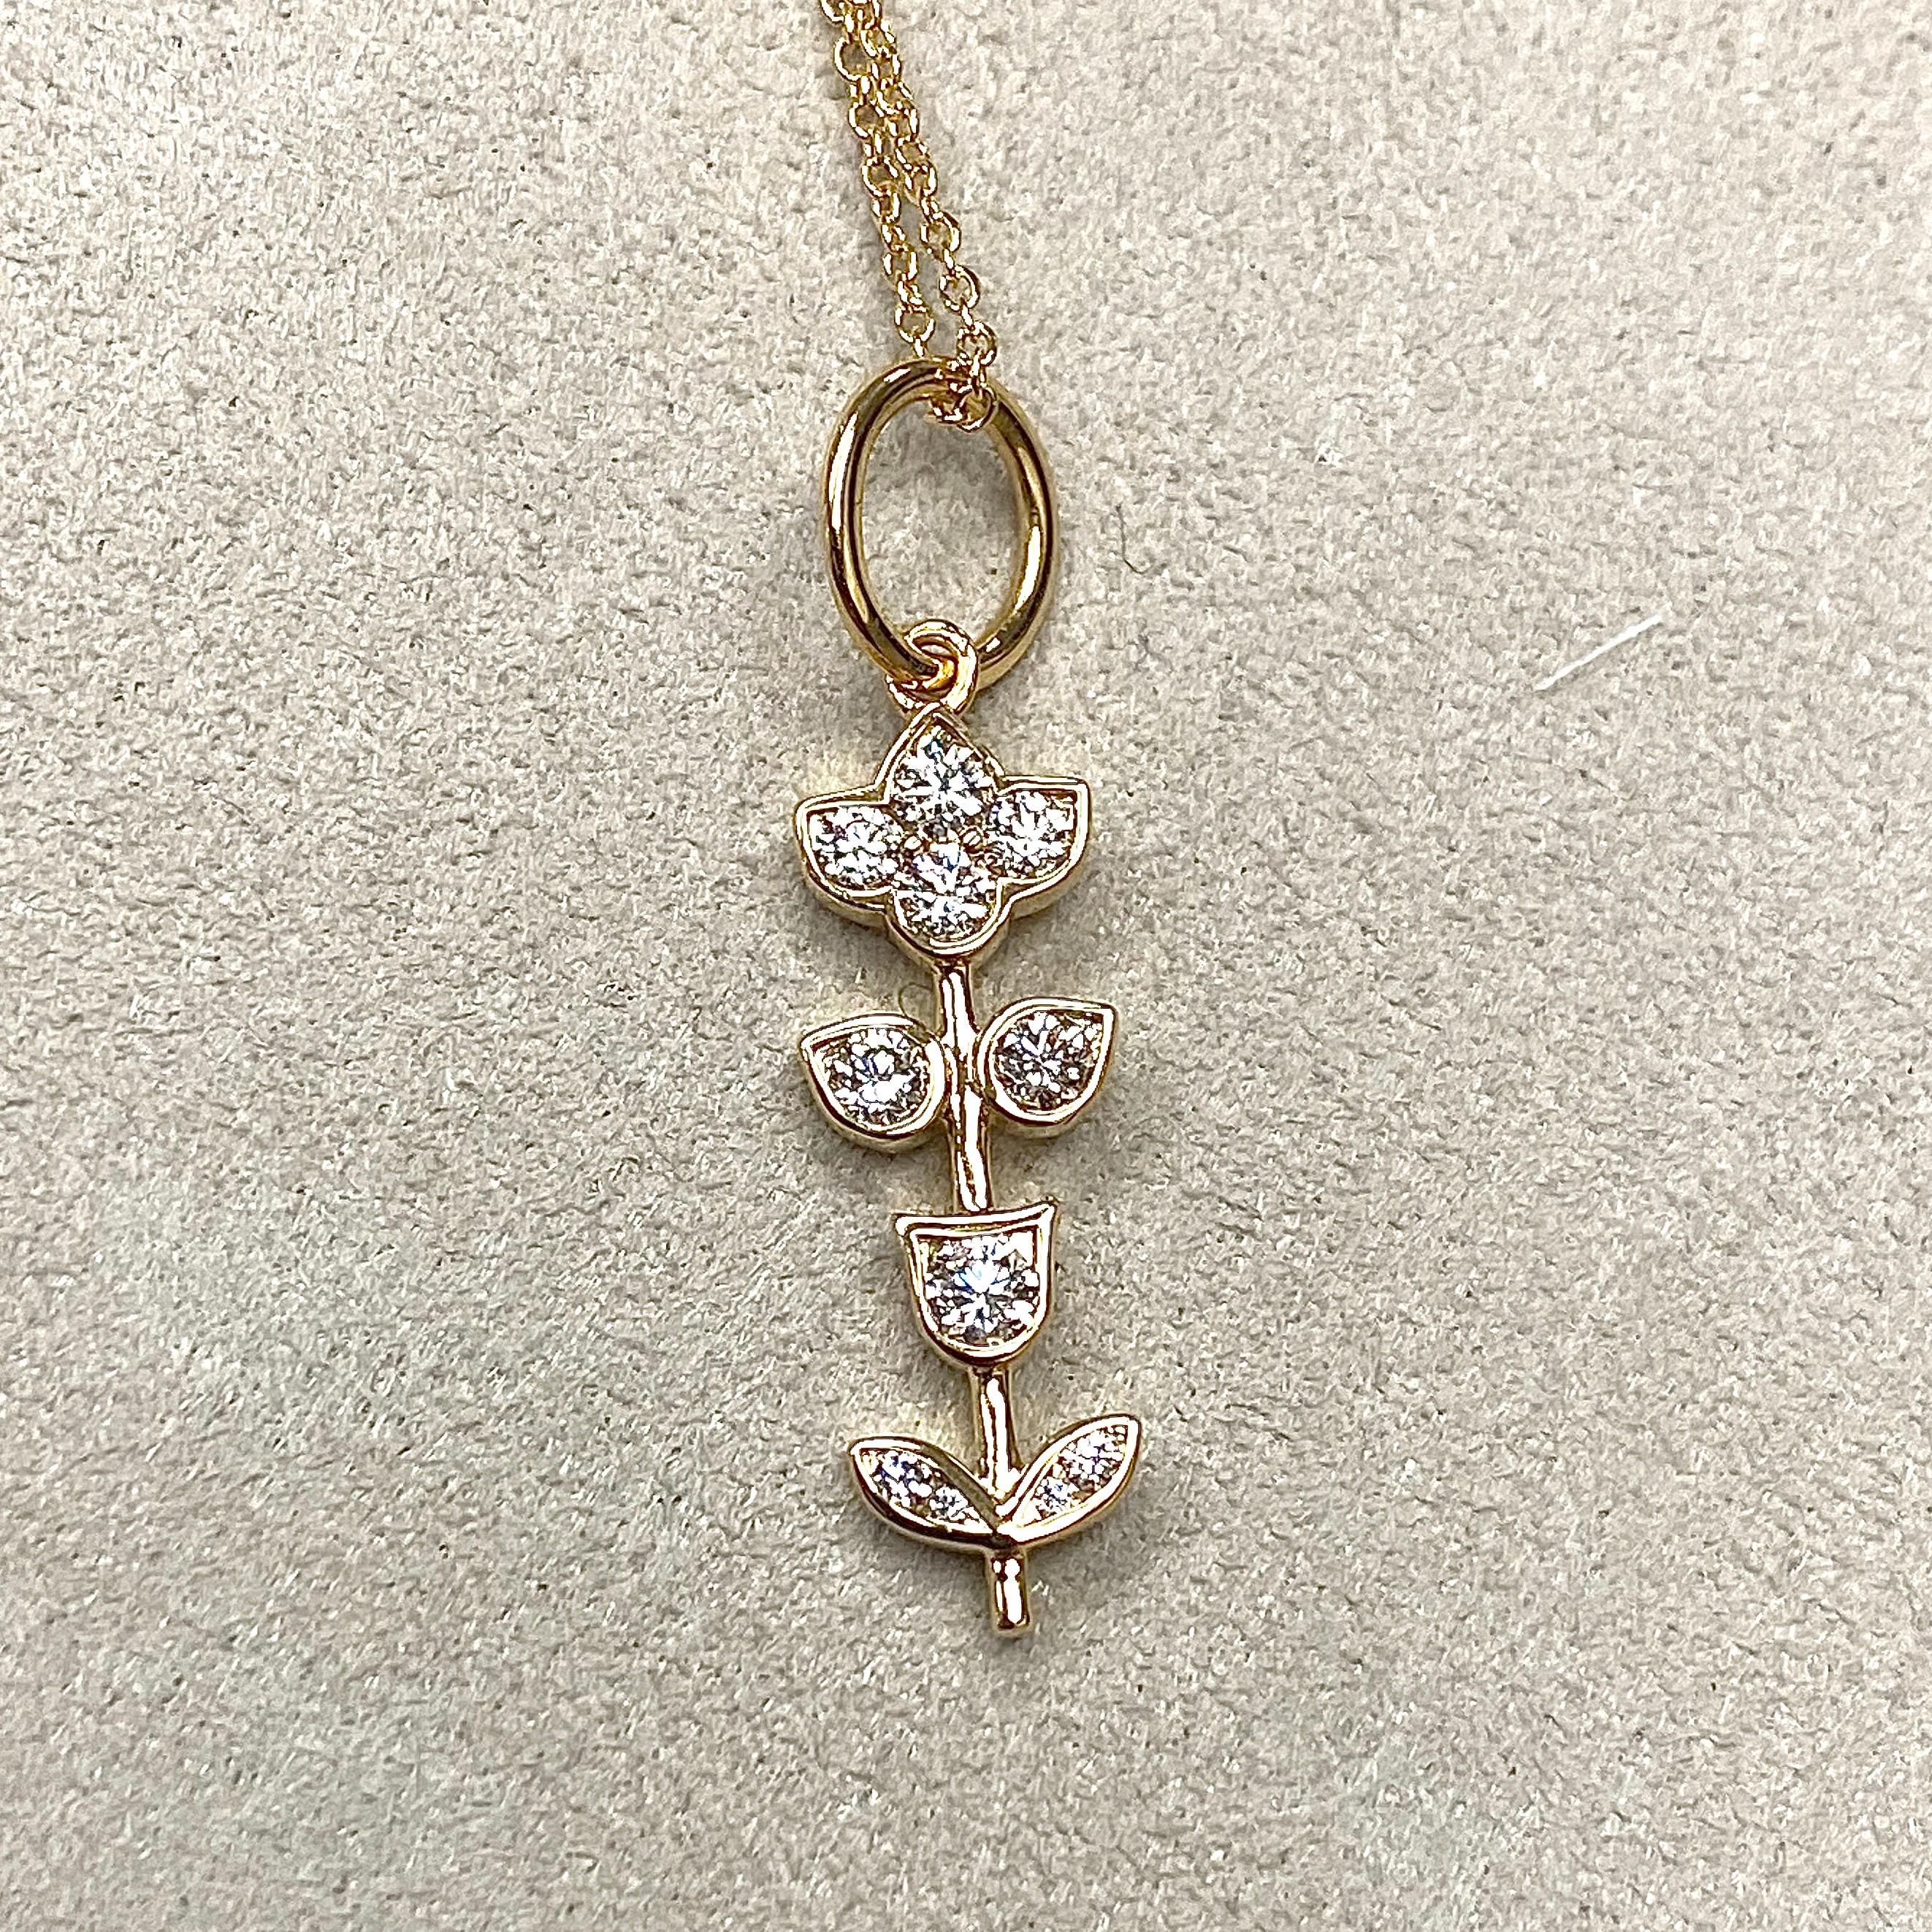 Created in 18kyg
Champagne diamonds 0.40 ct approx
Chain sold separately
Bloom where you are planted

About the Designers ~ Dharmesh & Namrata

Drawing inspiration from little things, Dharmesh & Namrata Kothari have created an extraordinary and